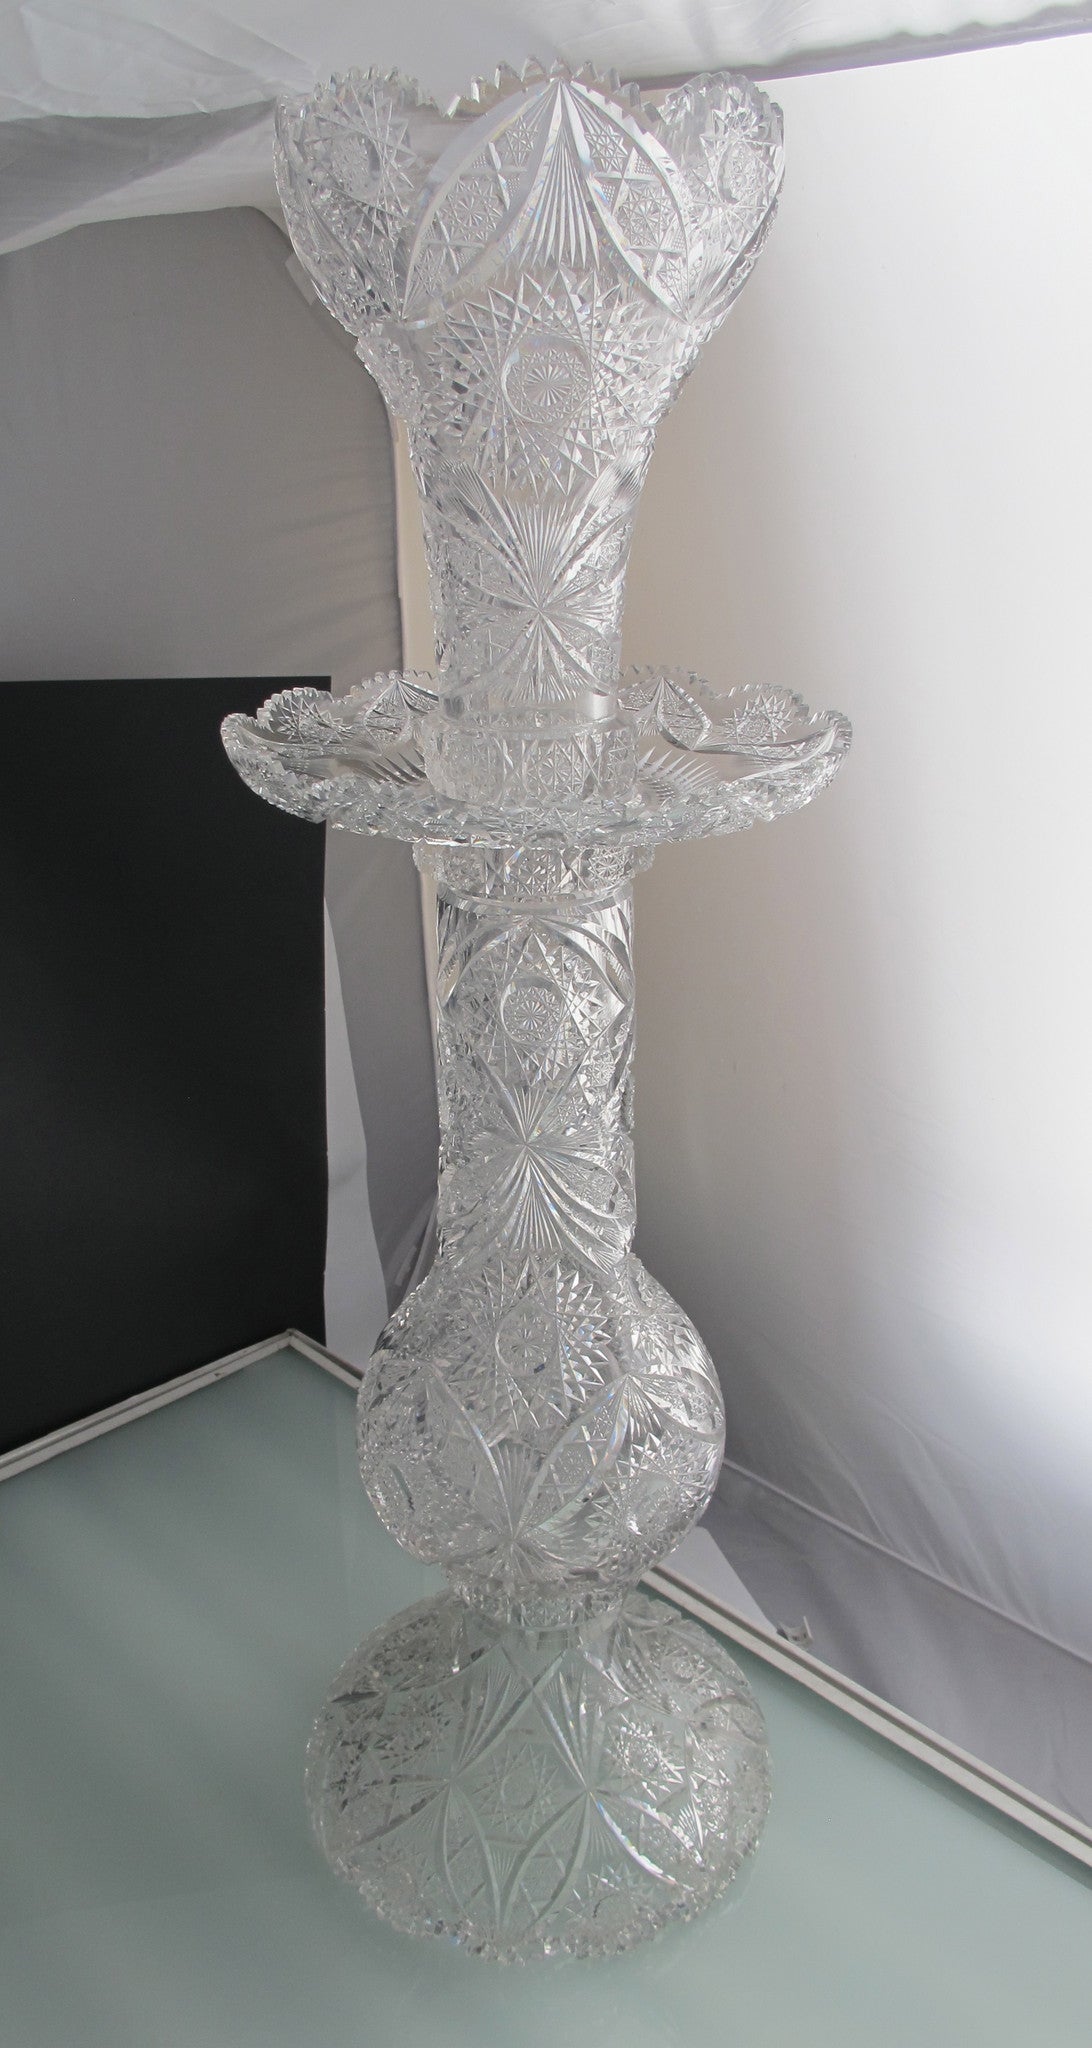 4 part American Brilliant Period Cut Glass vase ABP - O'Rourke crystal awards & gifts abp cut glass